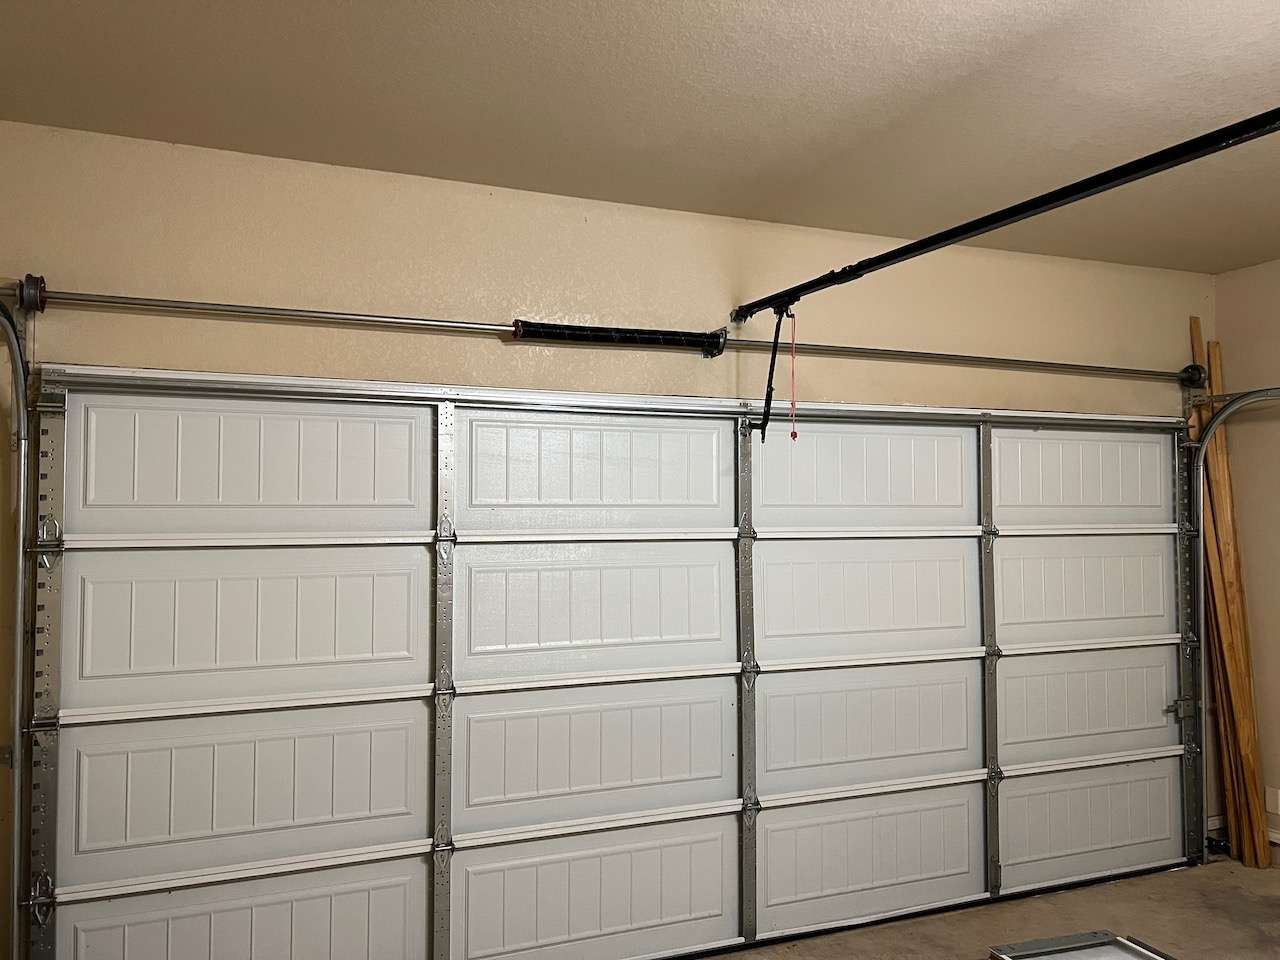 A quality non-insulated 16x7 garage door with three vertical rows of stiles.